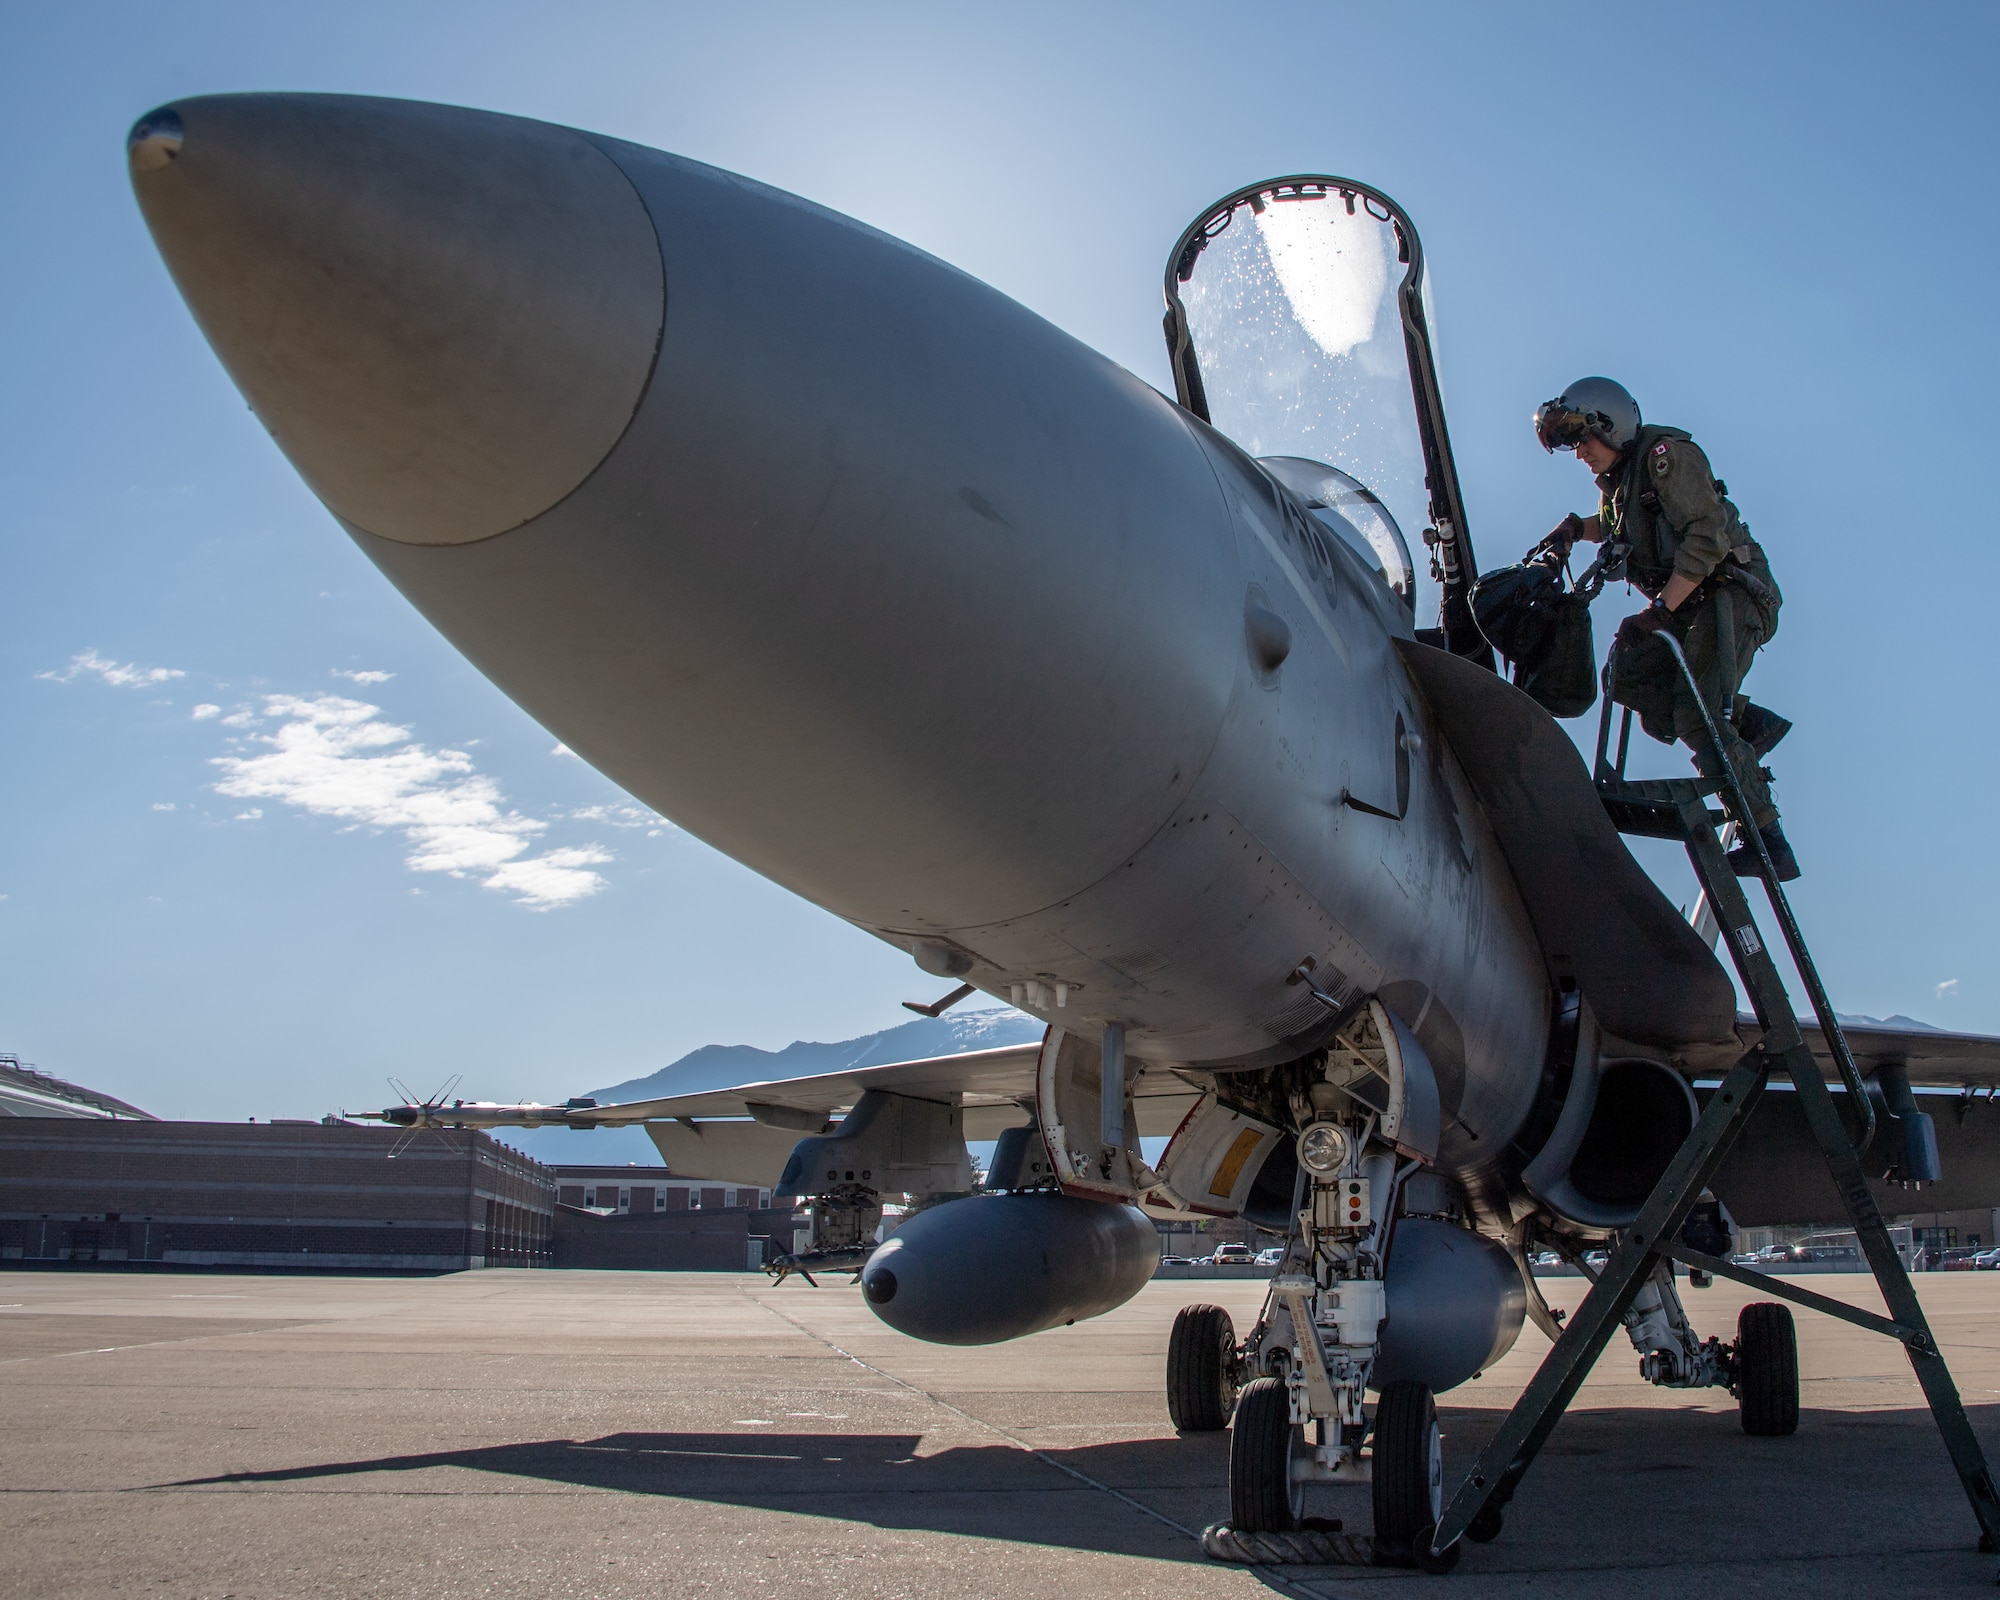 Royal Canadian Air Force pilot Capt. Jason Berndt, assigned to the 433rd Tactical Fighter Squadron, climbs a ladder to the cockpit of an F-18A fighter jet May 3, 2018, at Hill Air Force Base, Utah. The Canadian unit participated in a Weapons Evaluation Systems Program, or WSEP, exercise conducted by the 86th Fighter Weapons Squadron, a Hill tenant unit. (U.S. Air Force photo by R. Nial Bradshaw)